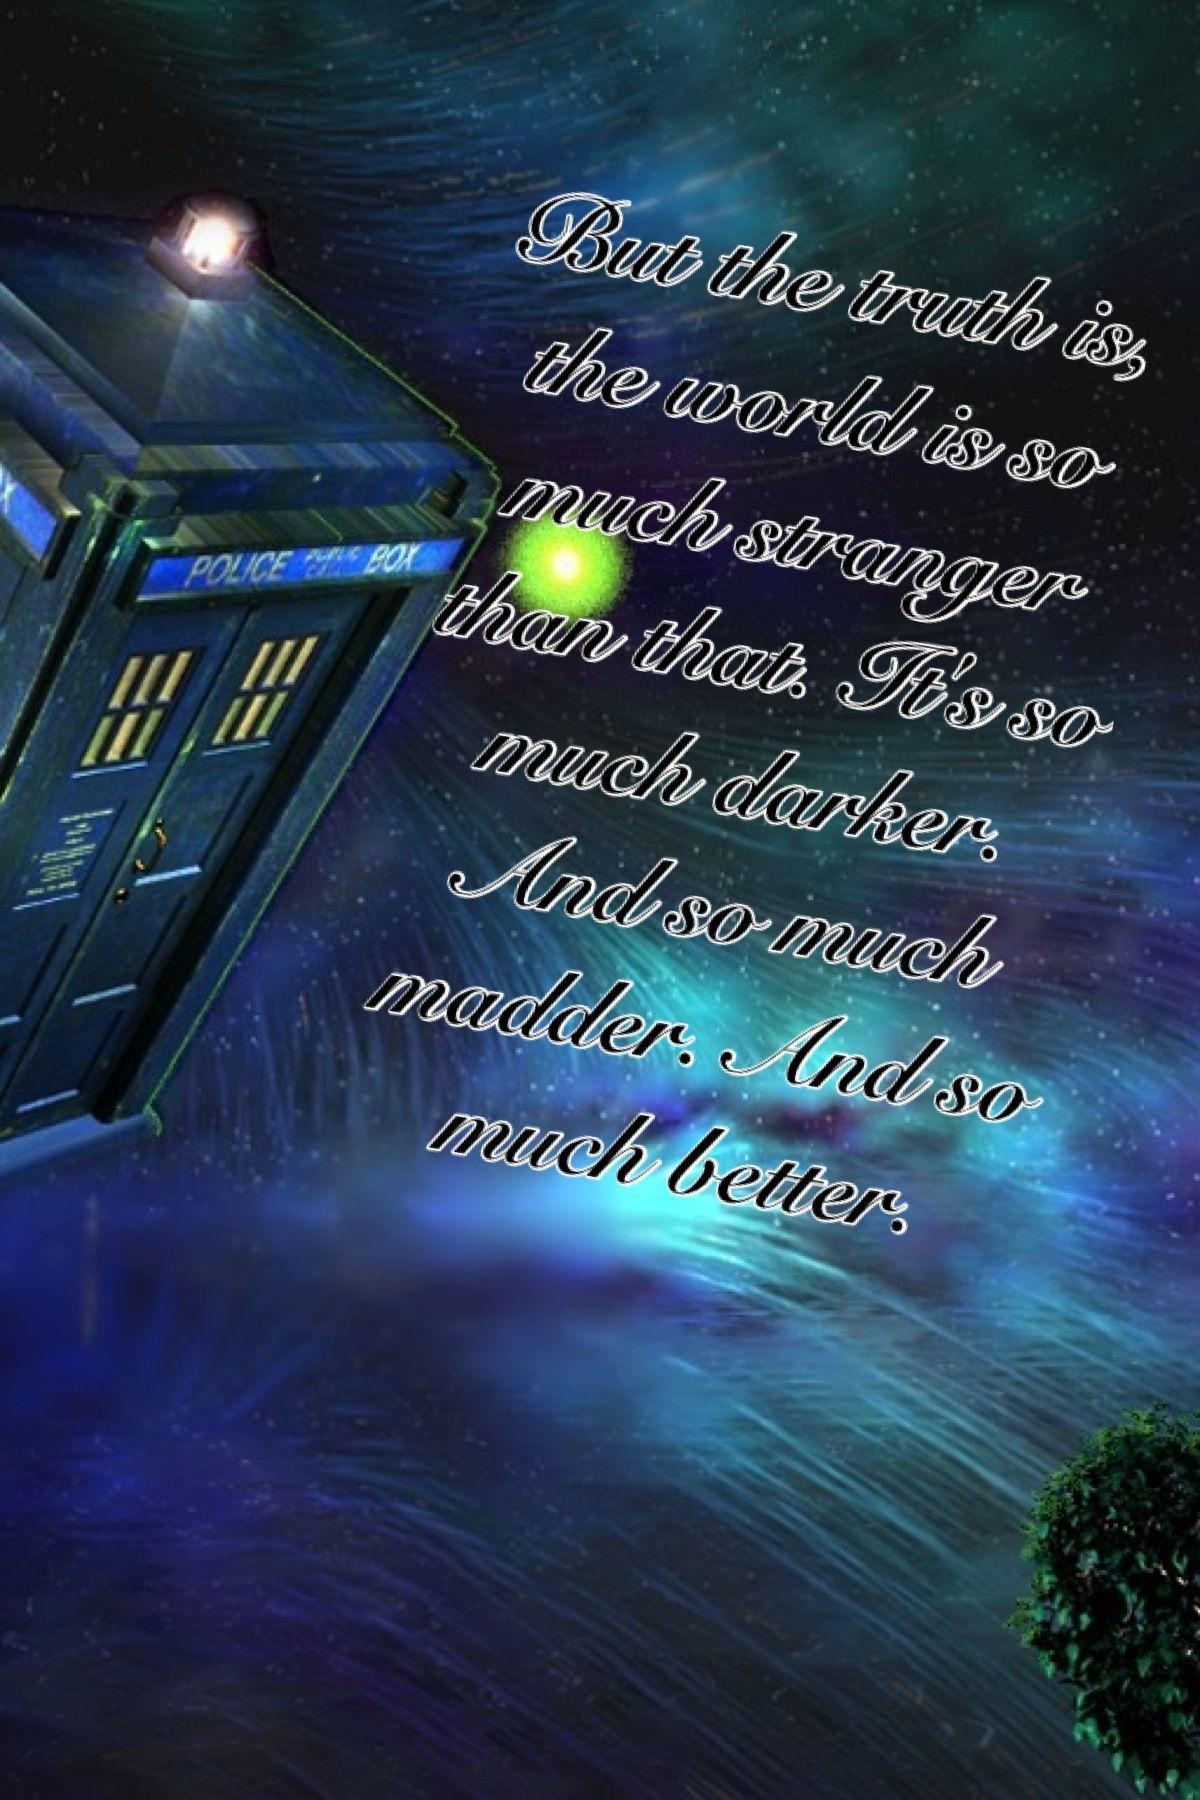 Doctor who wallpaper iphone. Doctor Who. Eleventh